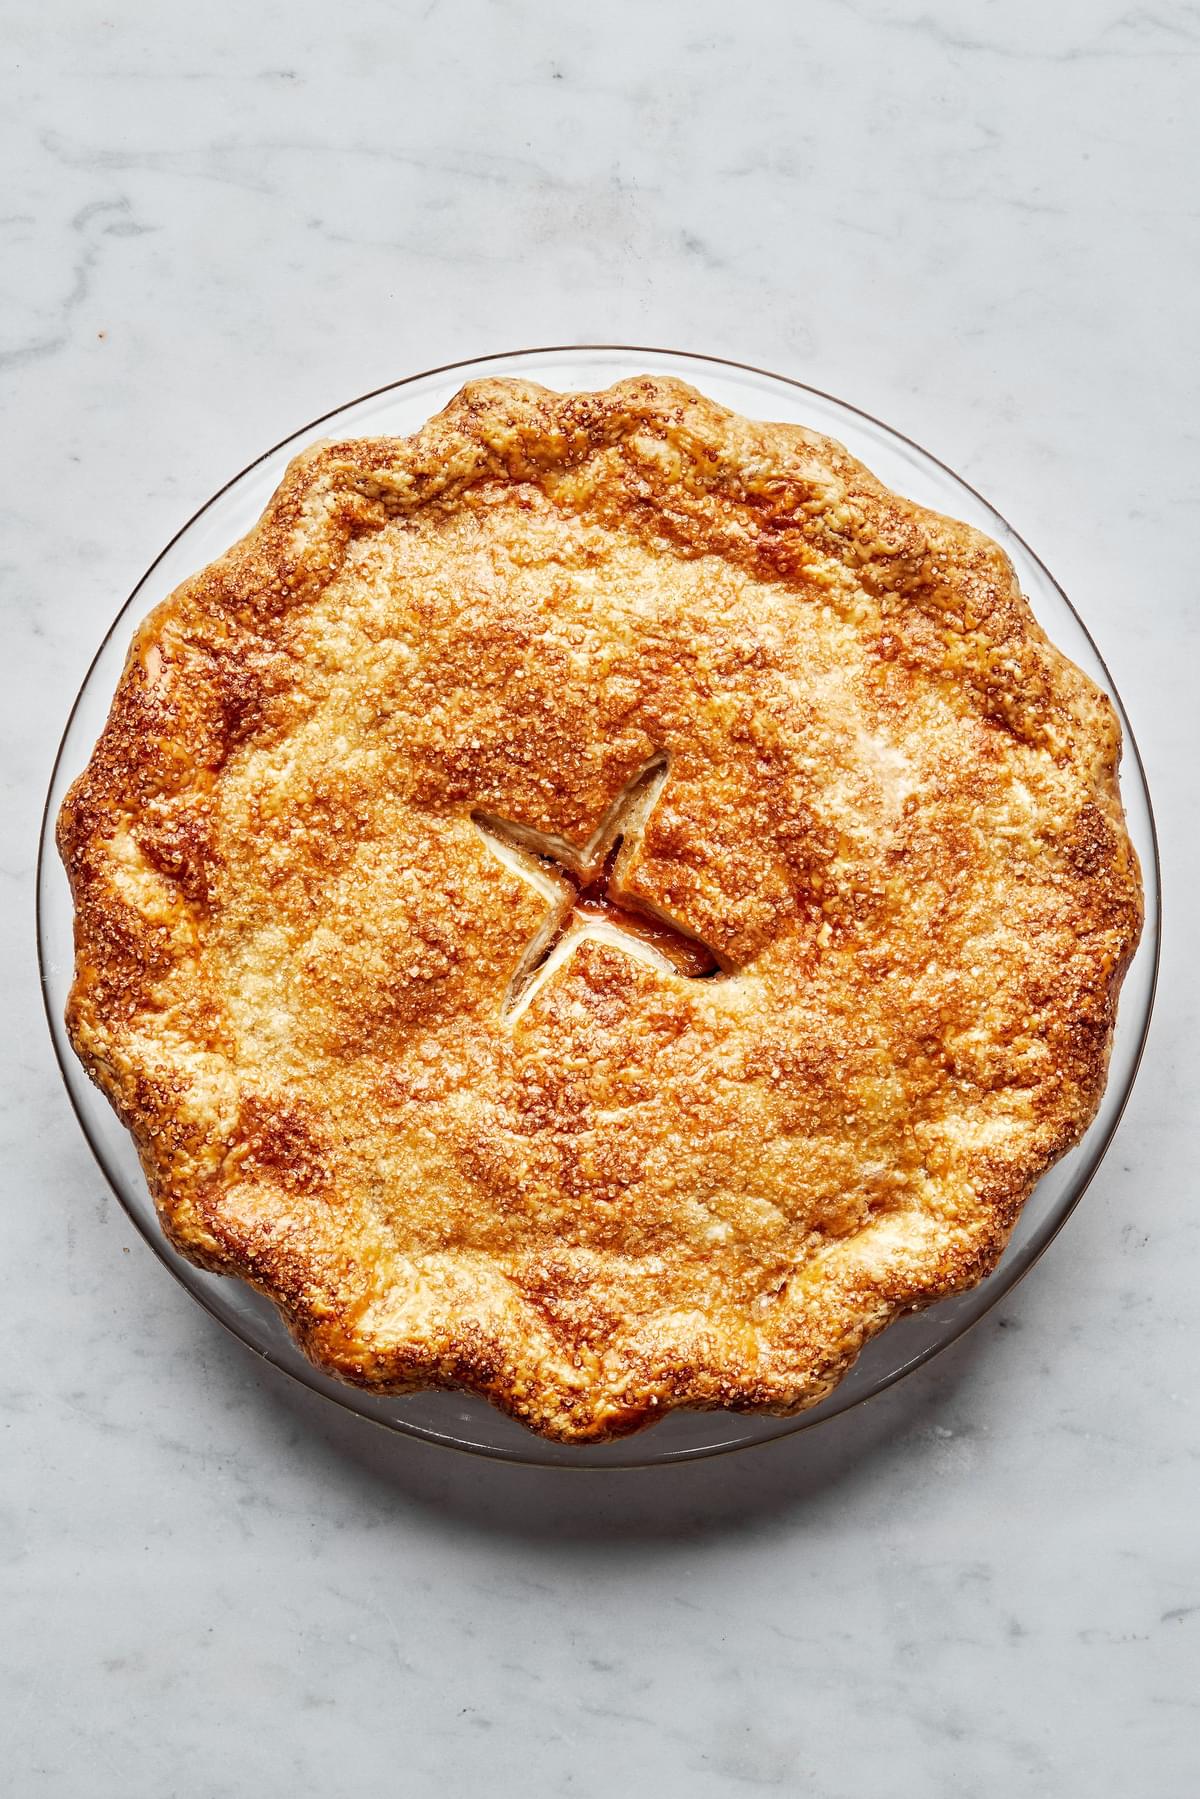 a homemade baked peach pie with brown flaky crust and sprinkled with raw sugar on top